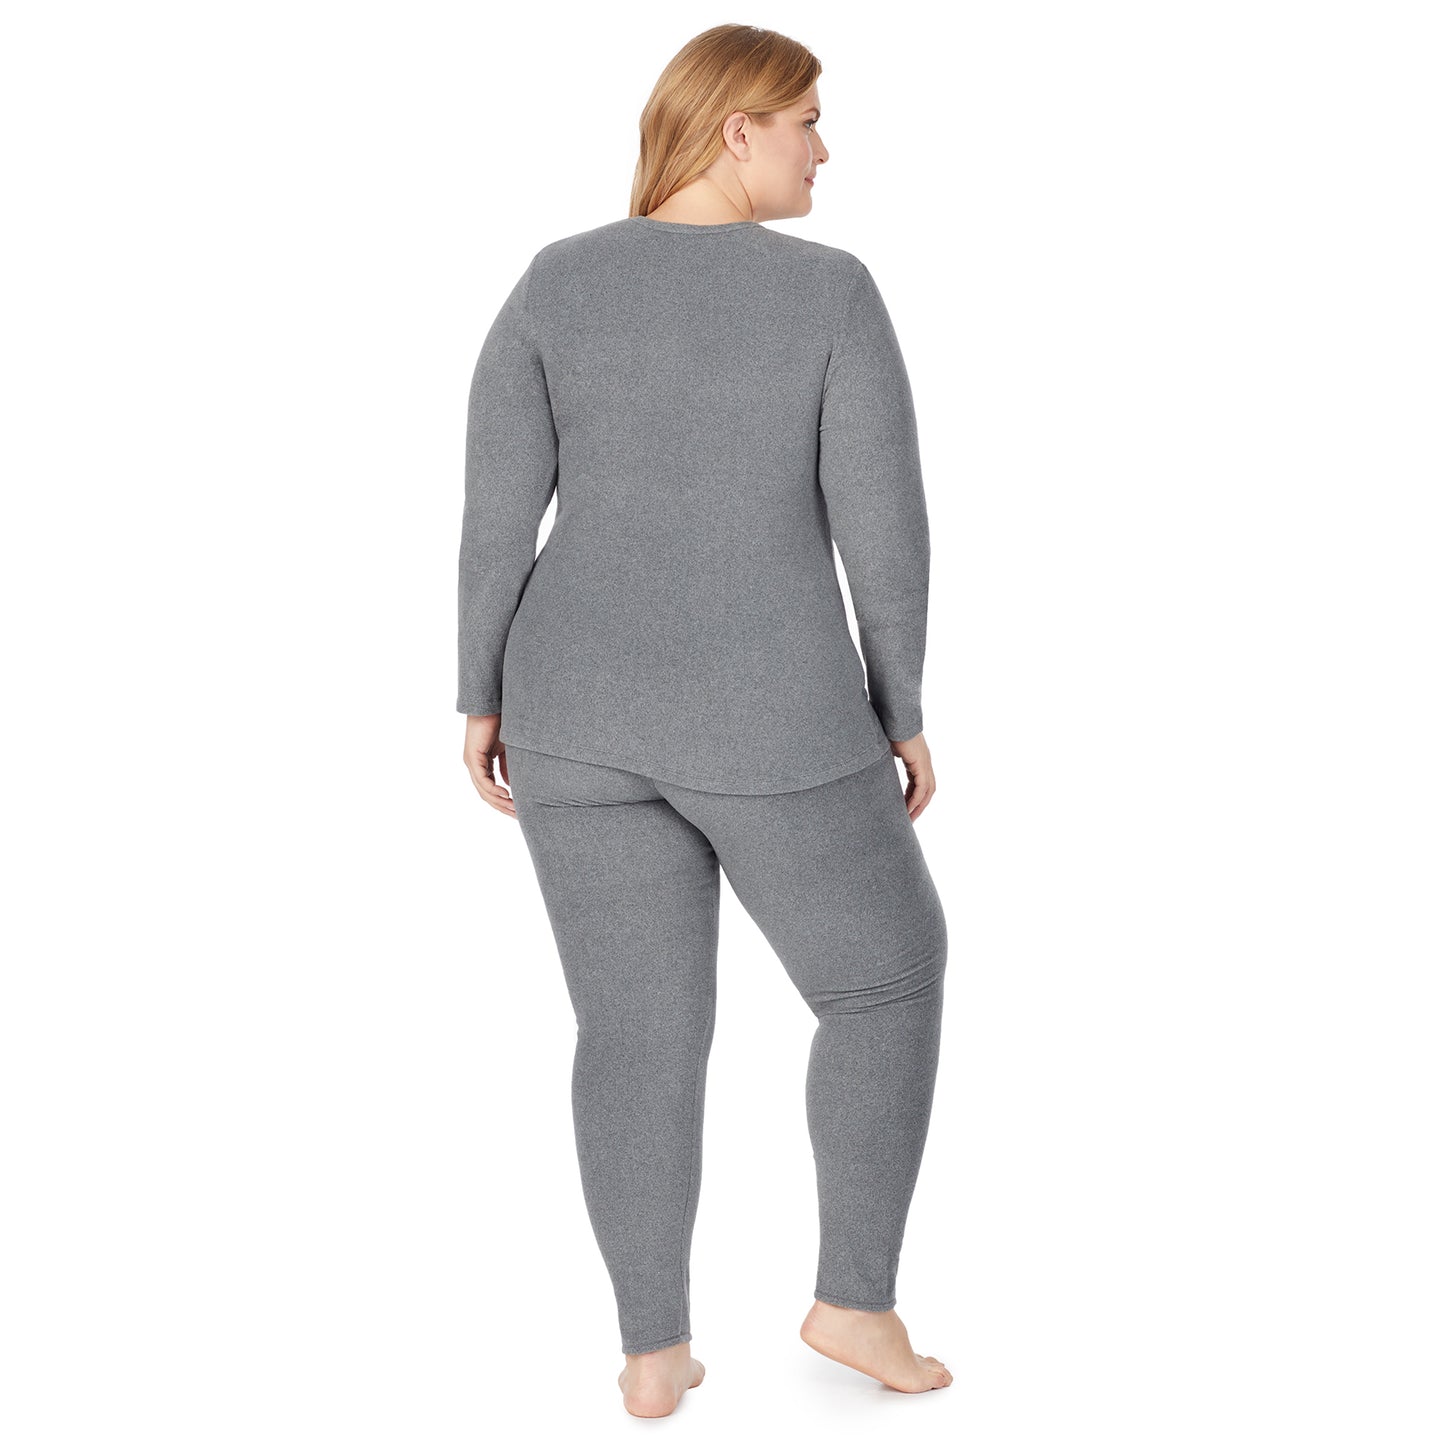 Charcoal Heather; Model is wearing size 1X. She is 5'9", Bust 38", Waist 36", Hips 48.5".@lower body of a lady wearing grey legging